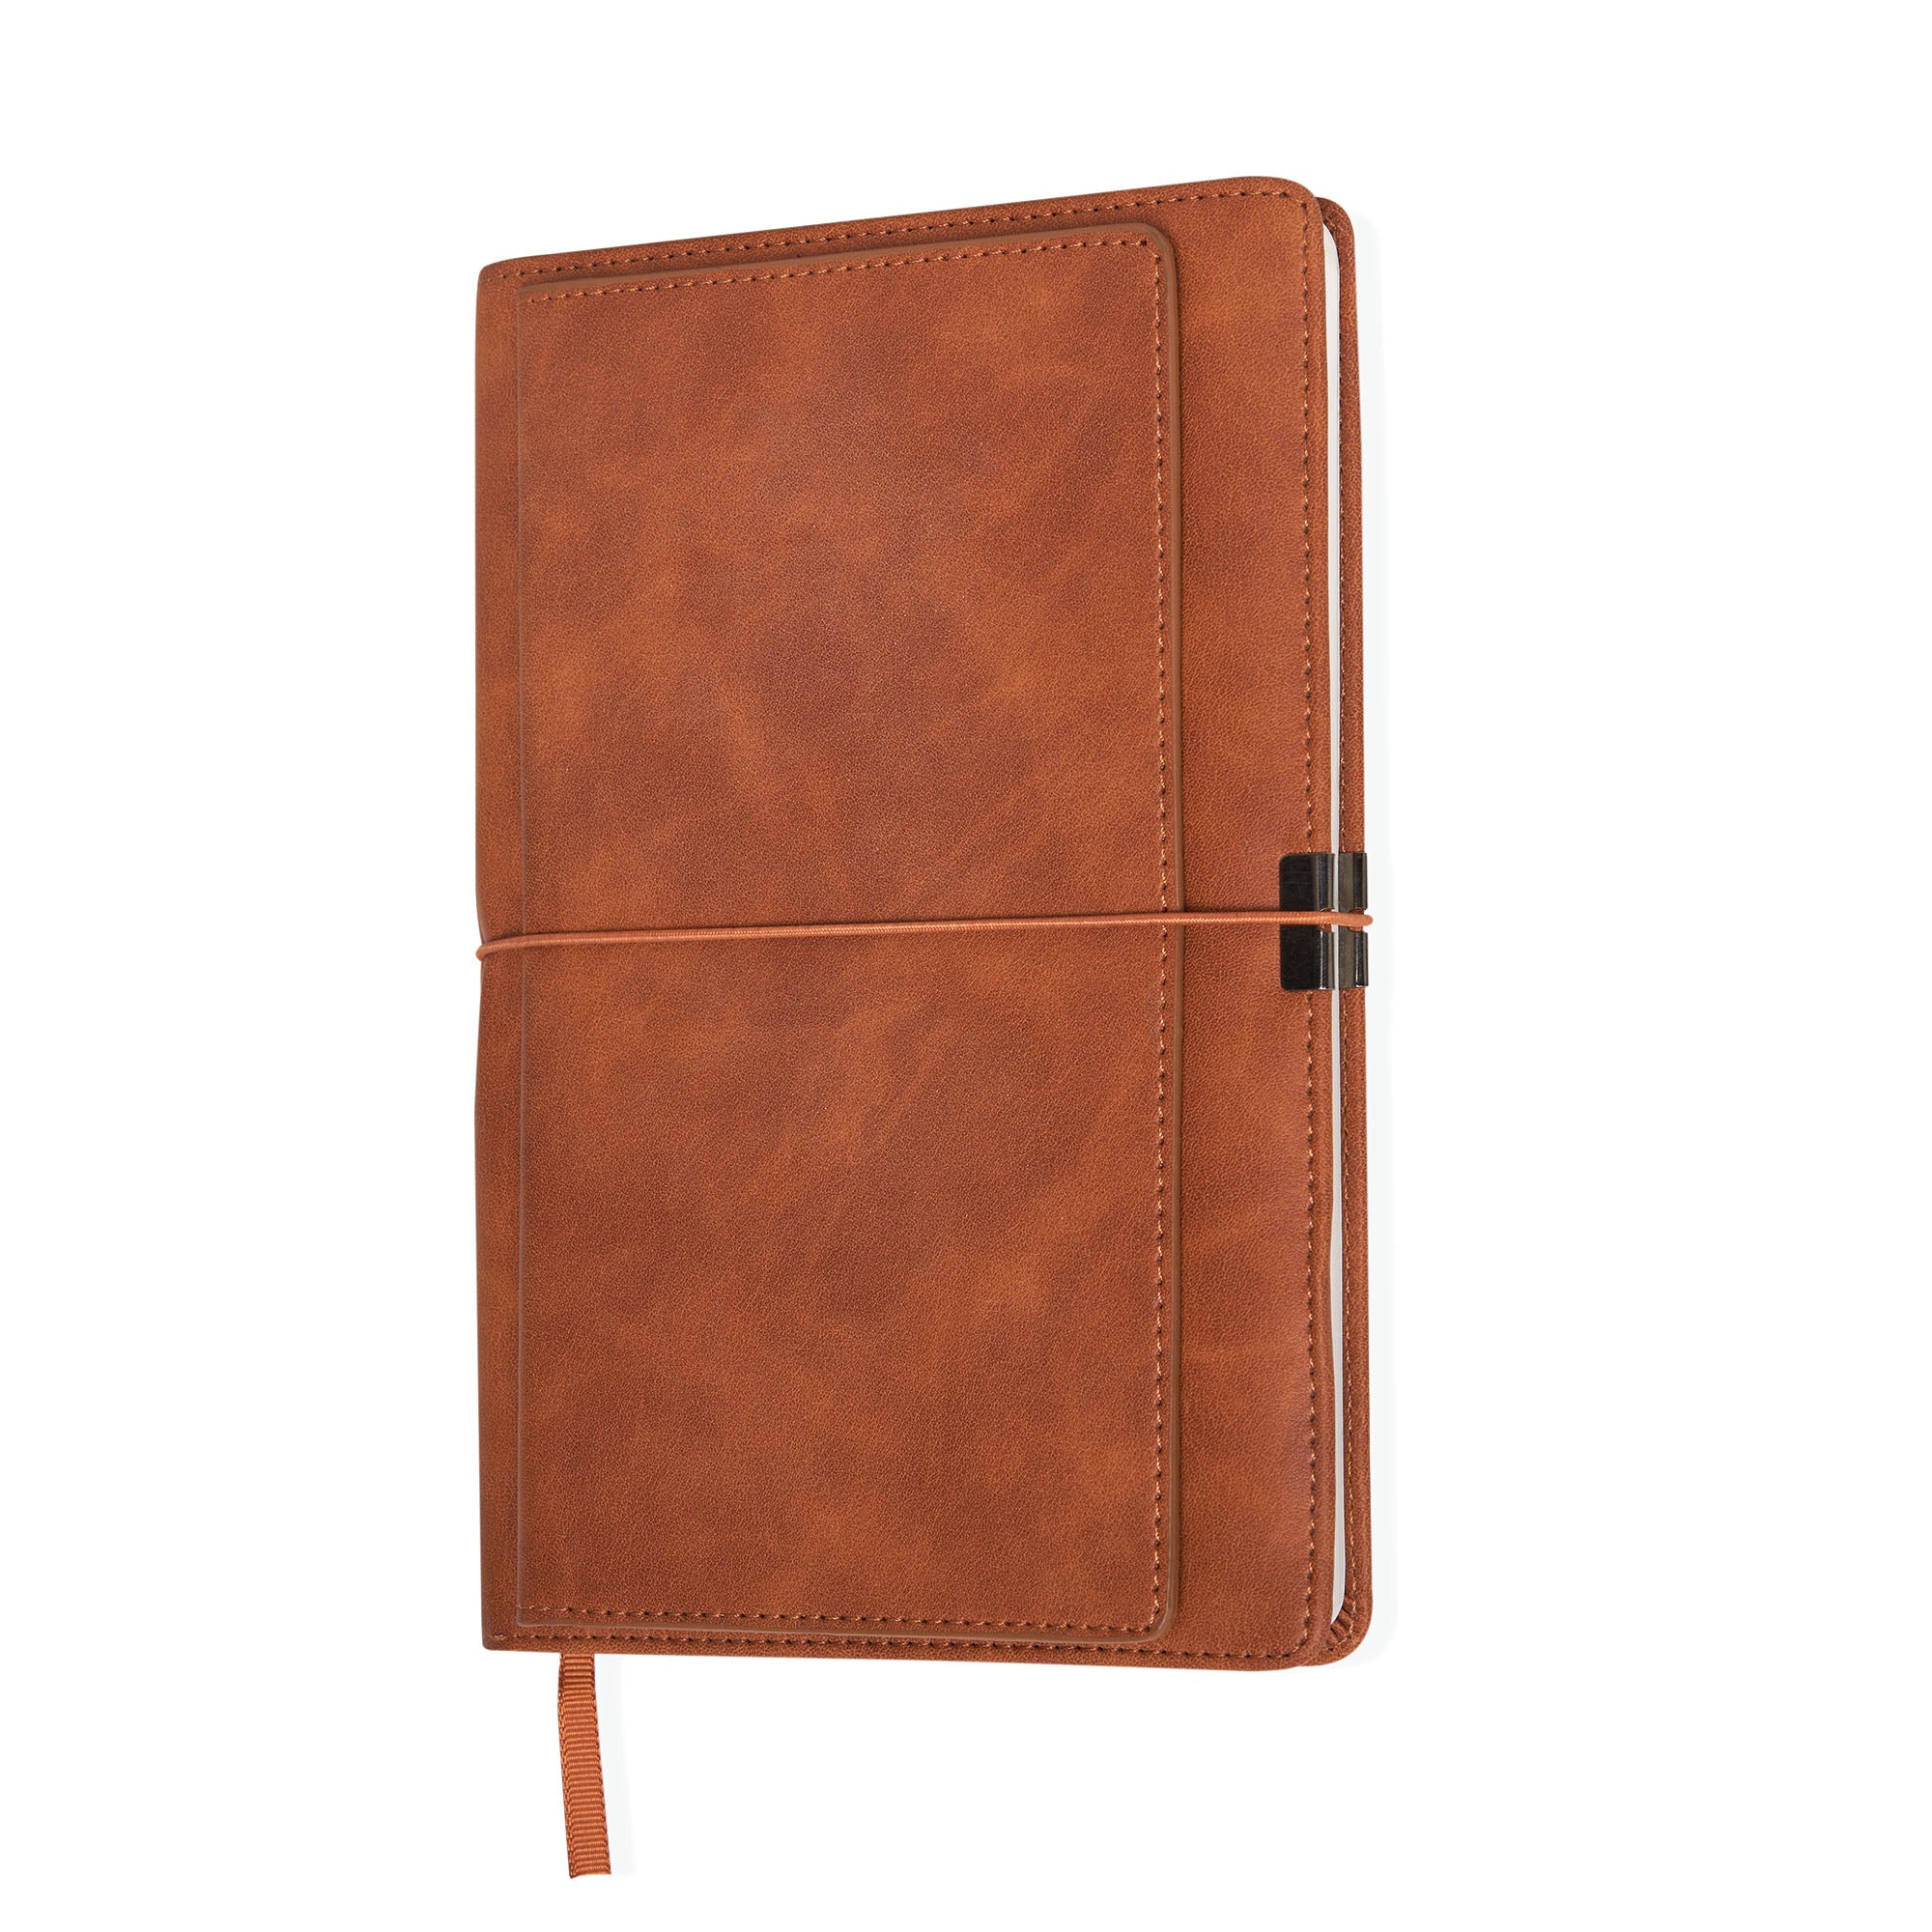 Personalized Cambie - A5 Hard Bound Sophisticated Faux Leather Executive Notebook Diary - Brown